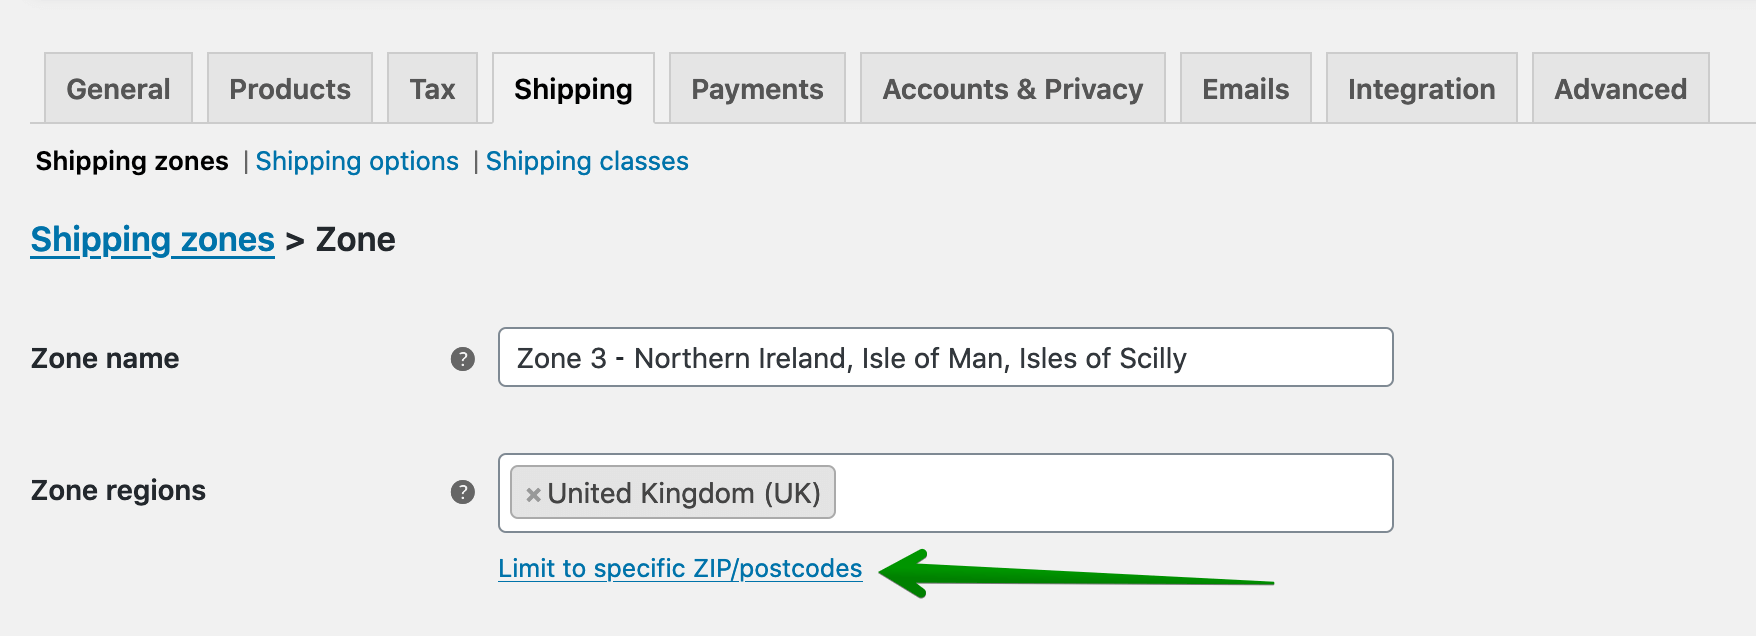 UK Shipping zones configuration - Limit to specific ZIP/postcodes